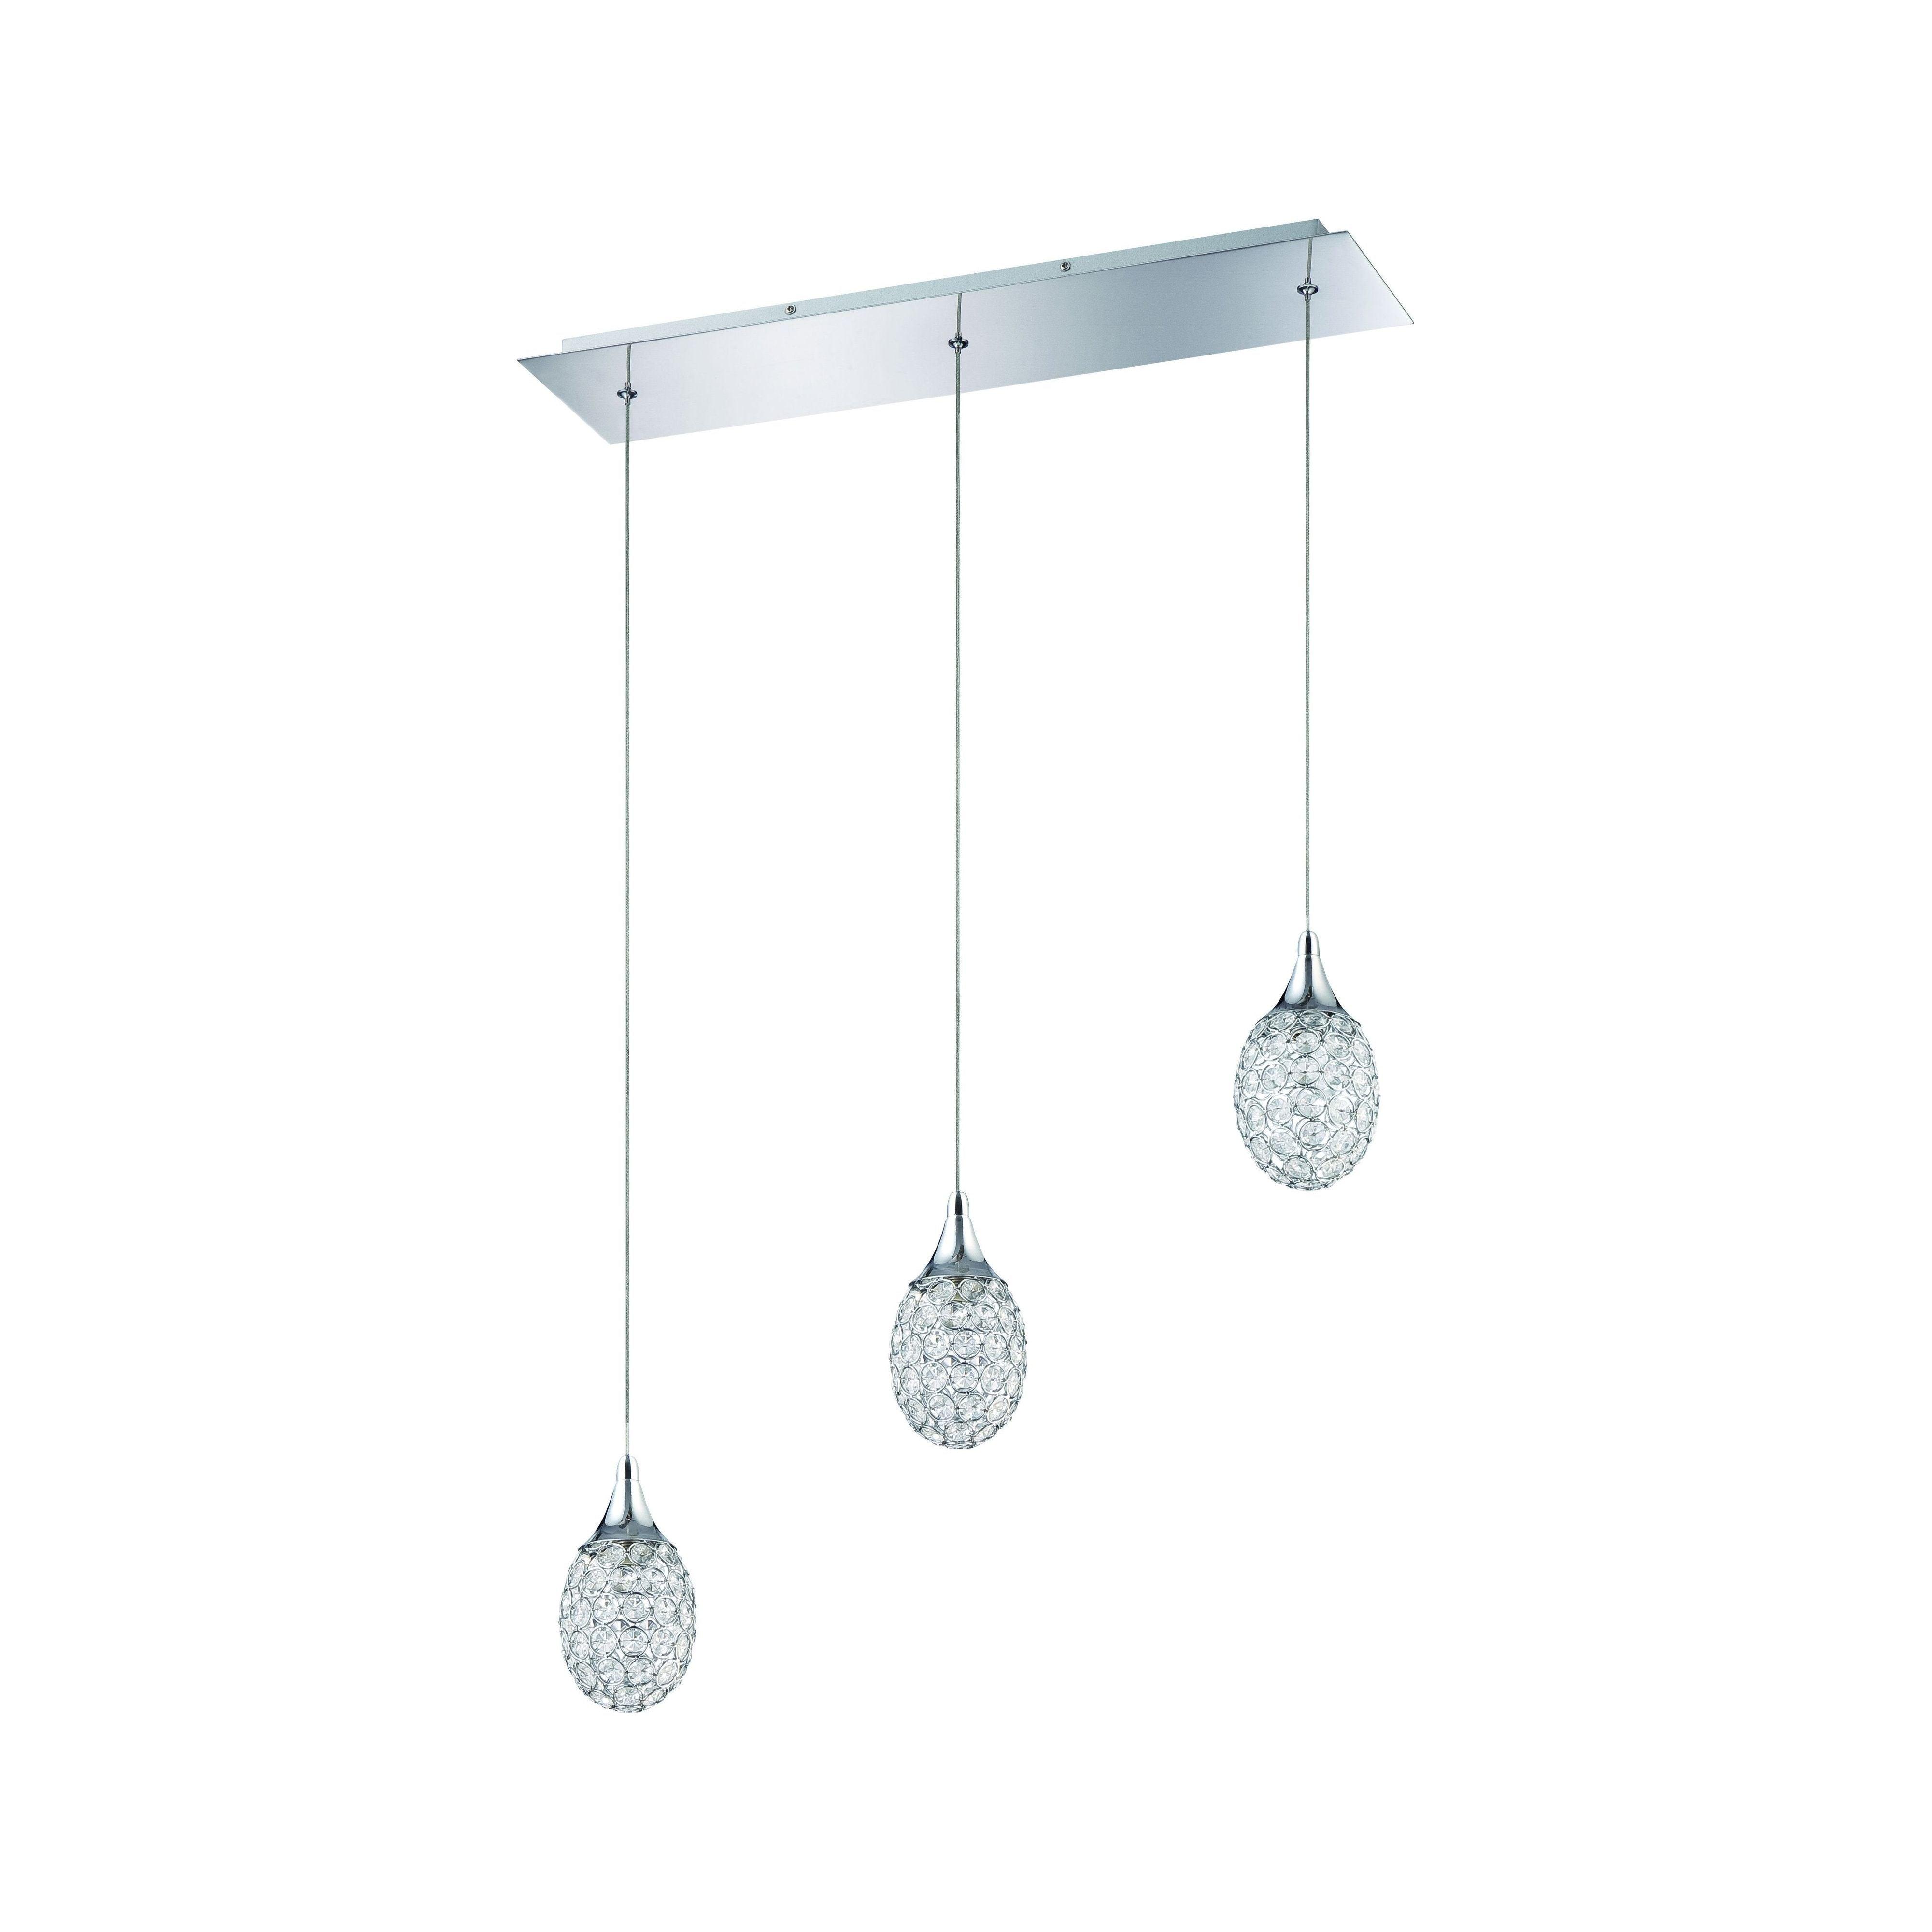 Kendal Lighting - Crys Linear Suspension - Lights Canada